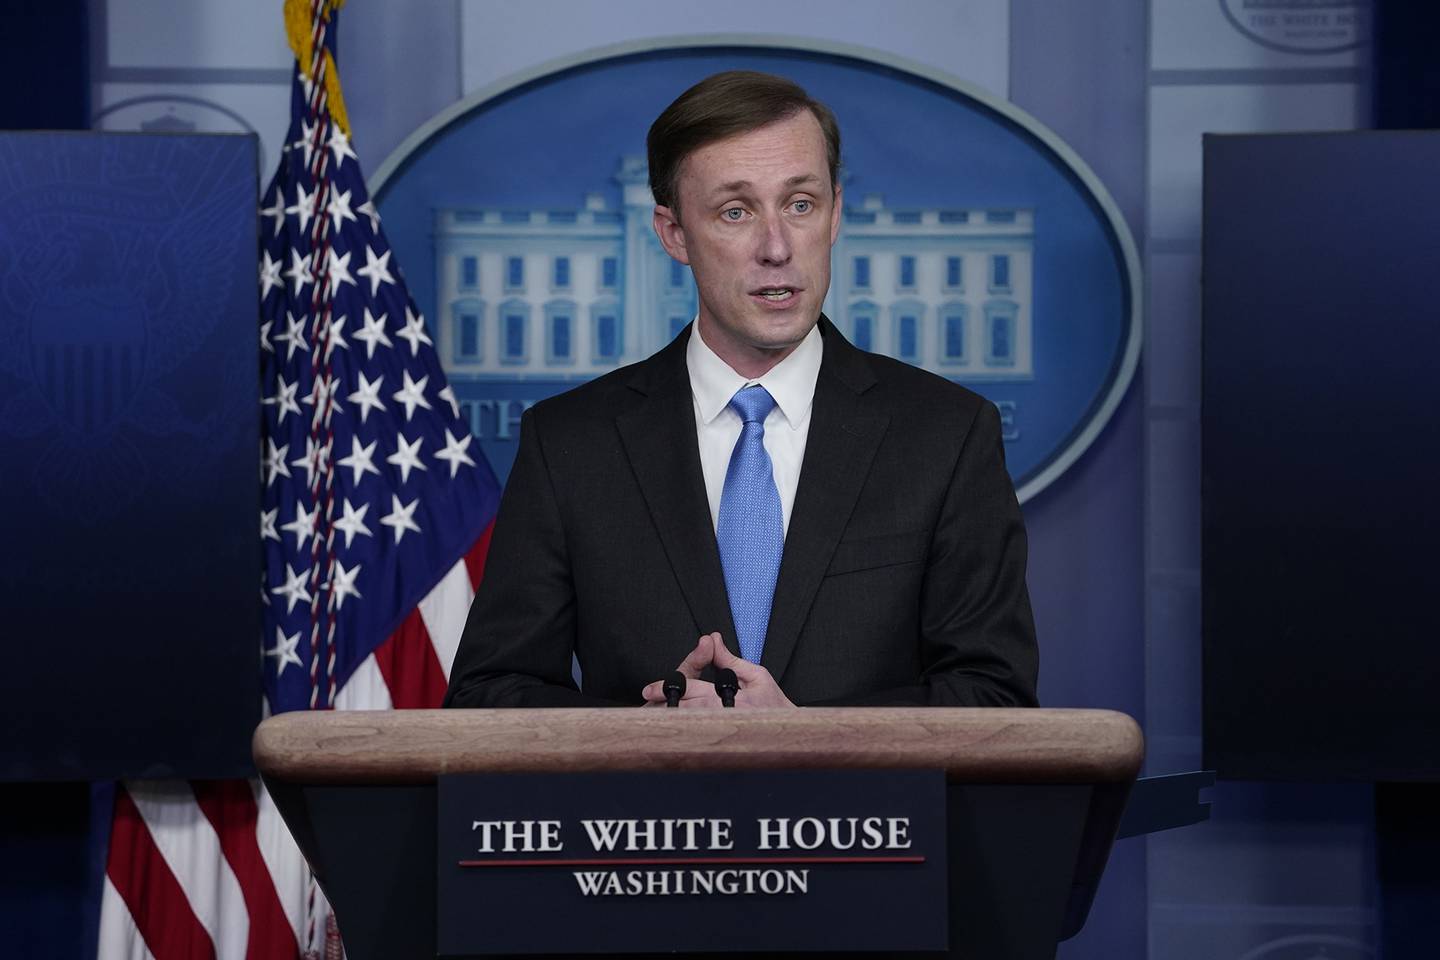 National security adviser Jake Sullivan speaks during a press briefing at the White House on Feb. 4, 2021, in Washington.